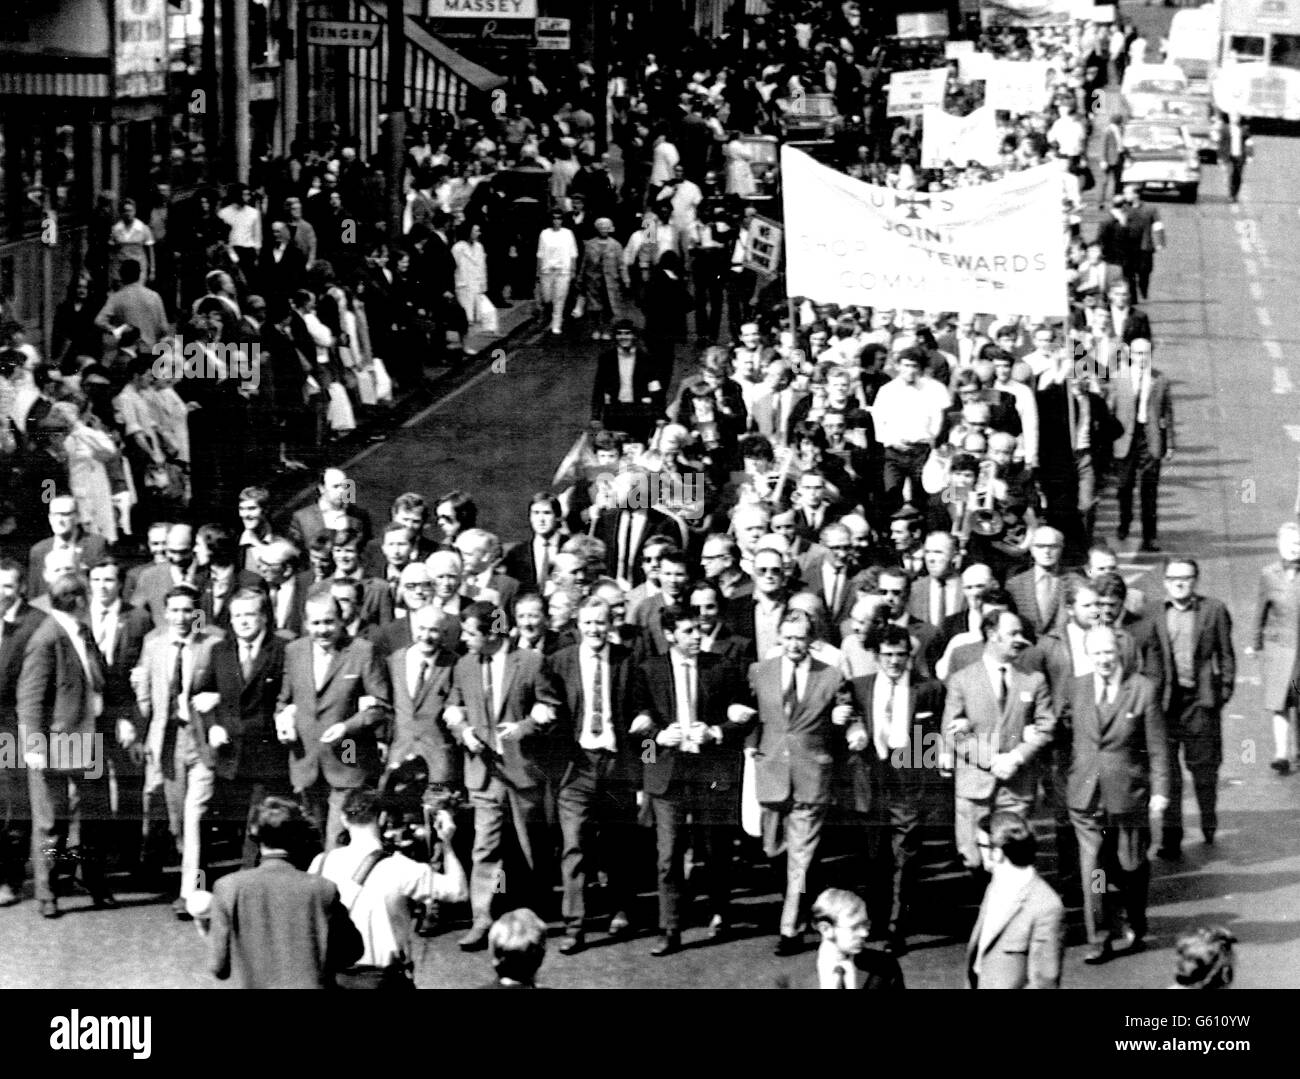 The head of the column passing through the centre of Glasgow when an estimated 30,000 to 40,000 workers in Clydeside industry marched in what was claimed to be the biggest demonstration seen in Scotland - a protest against the reorganisation of Upper Clyde Shipbuilders. Stock Photo